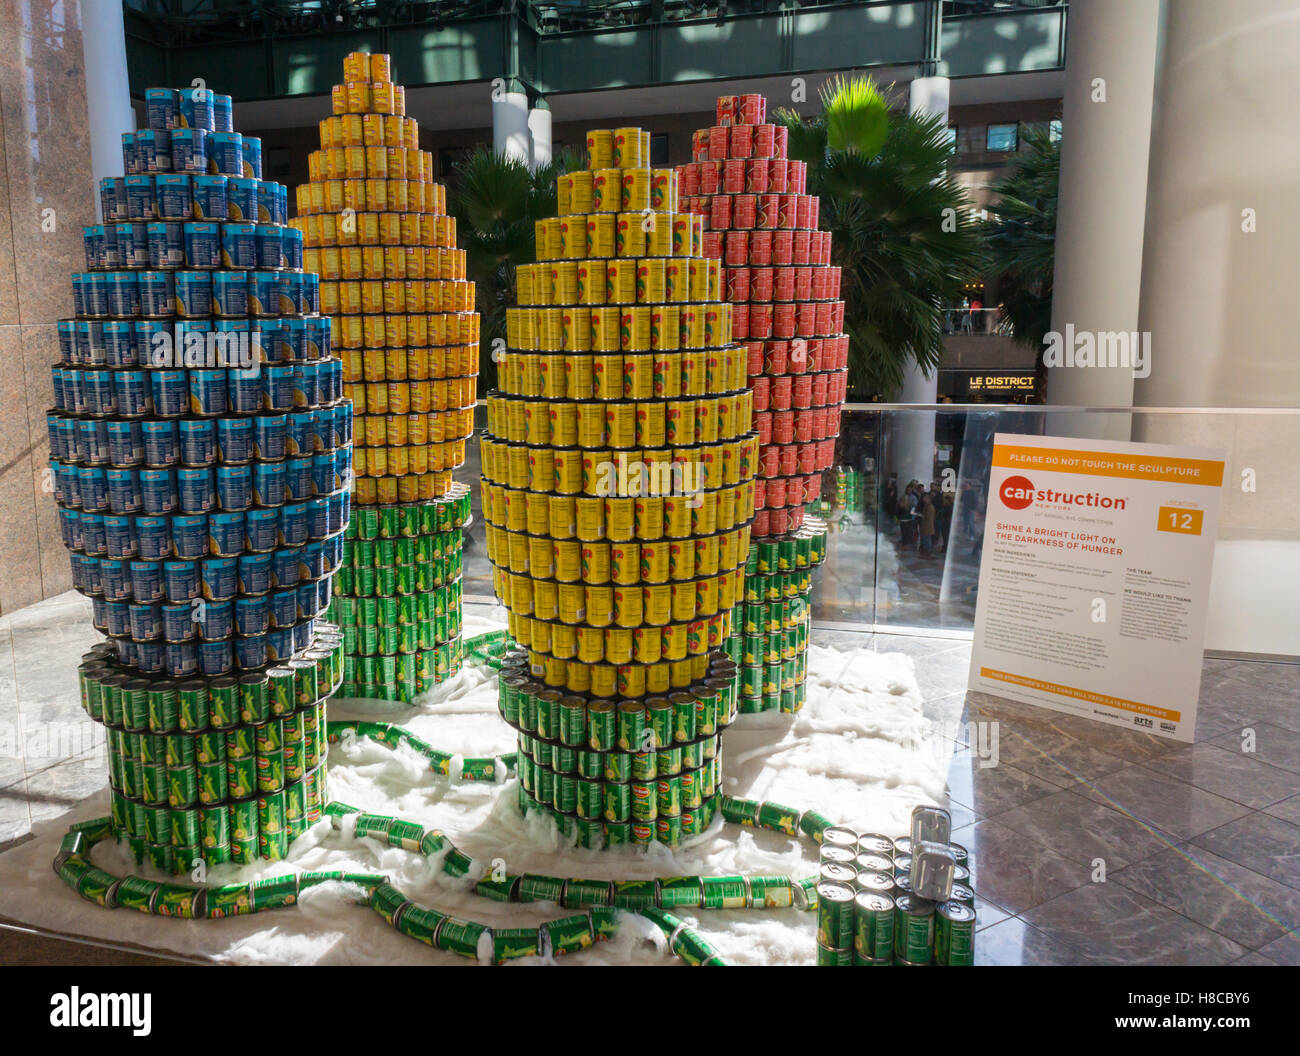 Shine a Bright Light on the Darkness of Hunger by AKF Group in the 24th annual Canstruction Design Competition in New York, seen on Friday, November 4, 2016, on display in Brookfield Place. The sculpture is made of 4272 cans and will feed 3416 New Yorkers. Architecture and design firm participate to design and build giant structures made from cans of food.  The cans are donated to City Harvest at the close of the exhibit. Over 100,000 cans of food were collected and will be used to feed the needy at 500 soup kitchens and food pantries. (© Richard B. Levine) Stock Photo